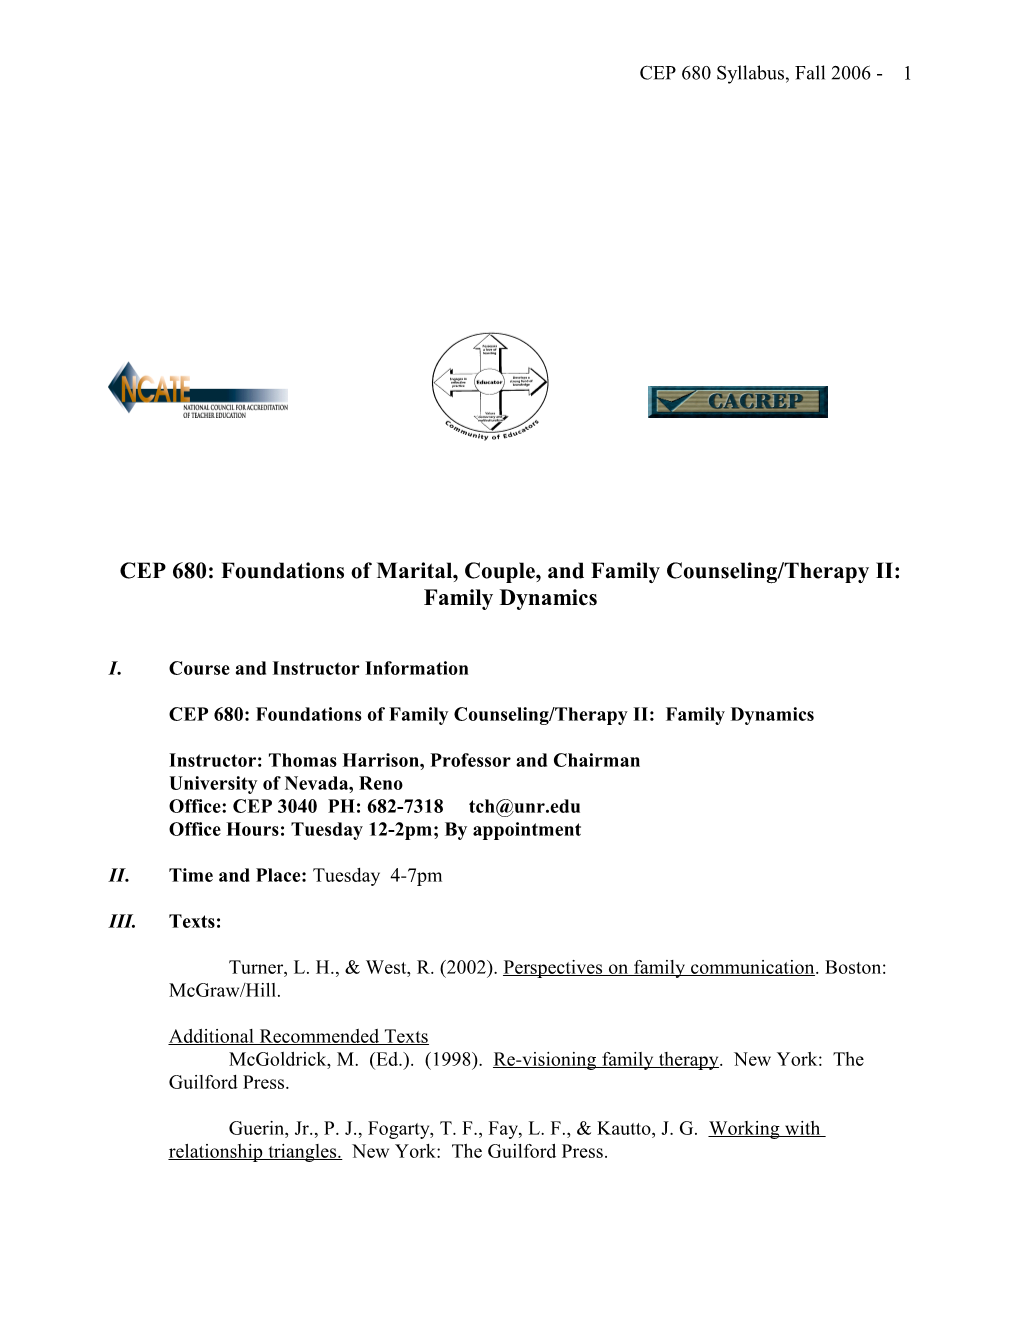 Foundations of Marital, Couple and Family Counseling / Therapy II: Family Dynamics